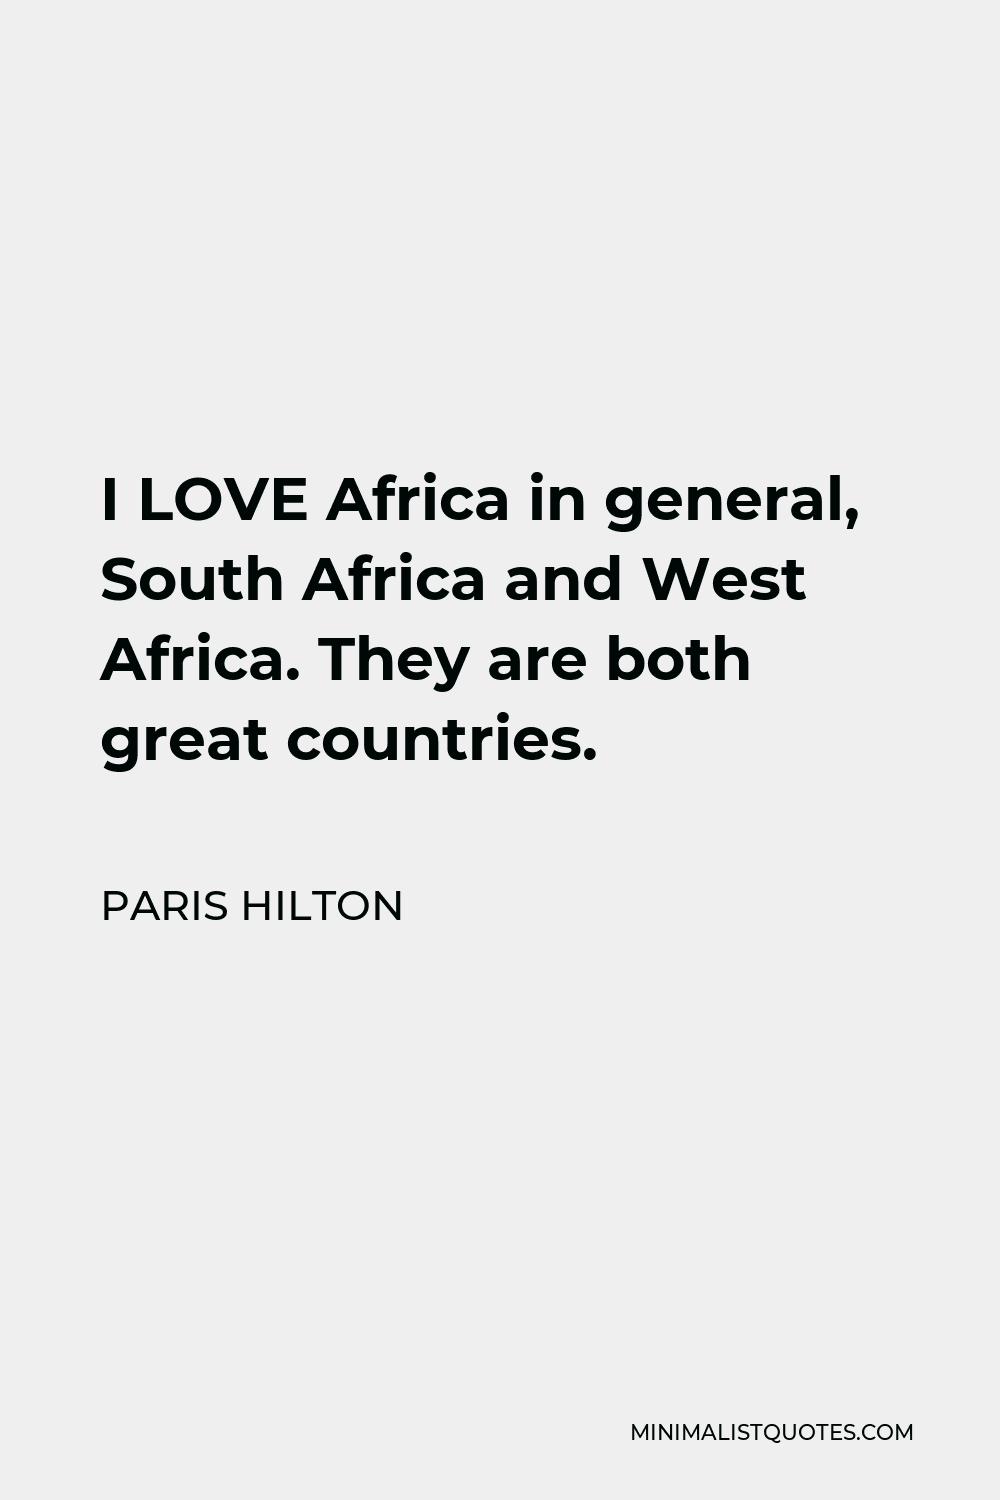 Paris Hilton Quote - I LOVE Africa in general, South Africa and West Africa. They are both great countries.